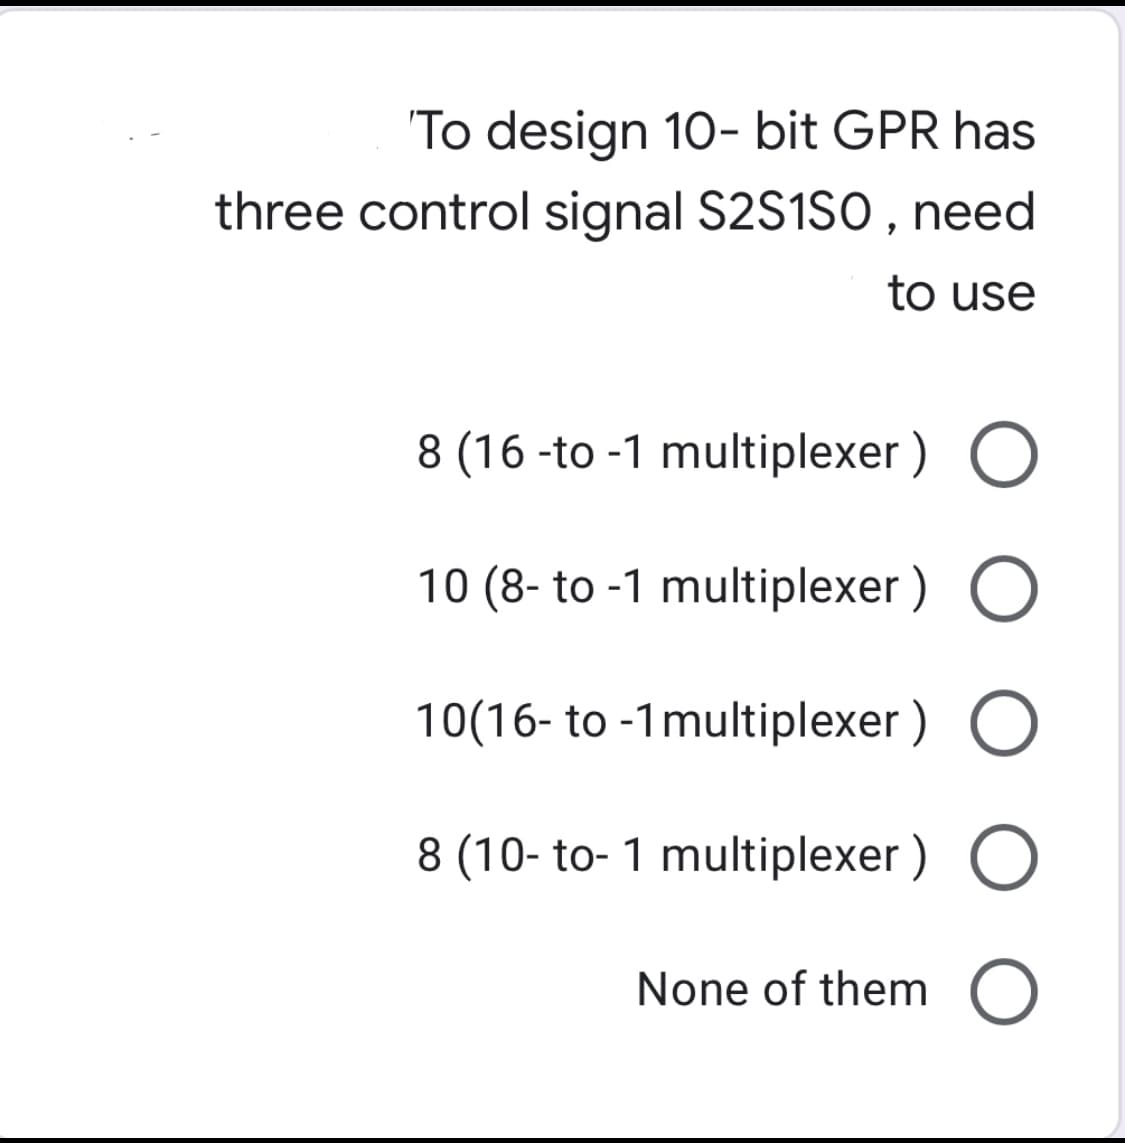 'To design 10- bit GPR has
three control signal S2S1SO, need
to use
8 (16 -to -1 multiplexer ) O
10 (8- to -1 multiplexer ) O
10(16- to -1multiplexer ) O
8 (10- to- 1 multiplexer ) O
None of them O
